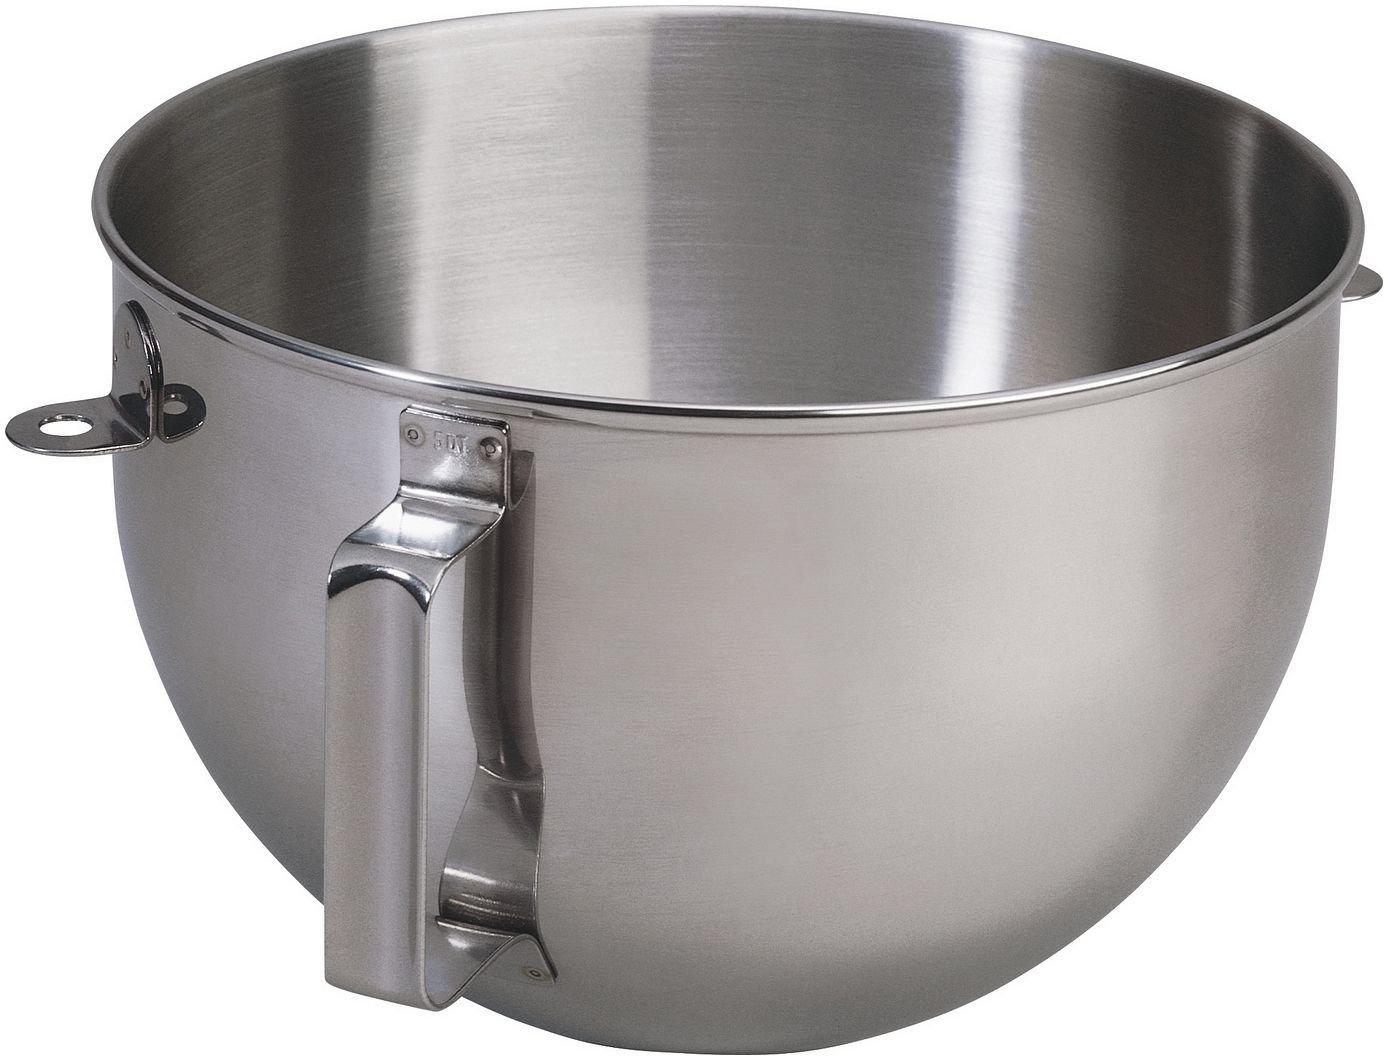 Stainless Steel Bowl Compatible with Kitchenaid Mixer 4.5/5QT，5 Quart  Stainless Bowl for Kitchen Aid Mixing